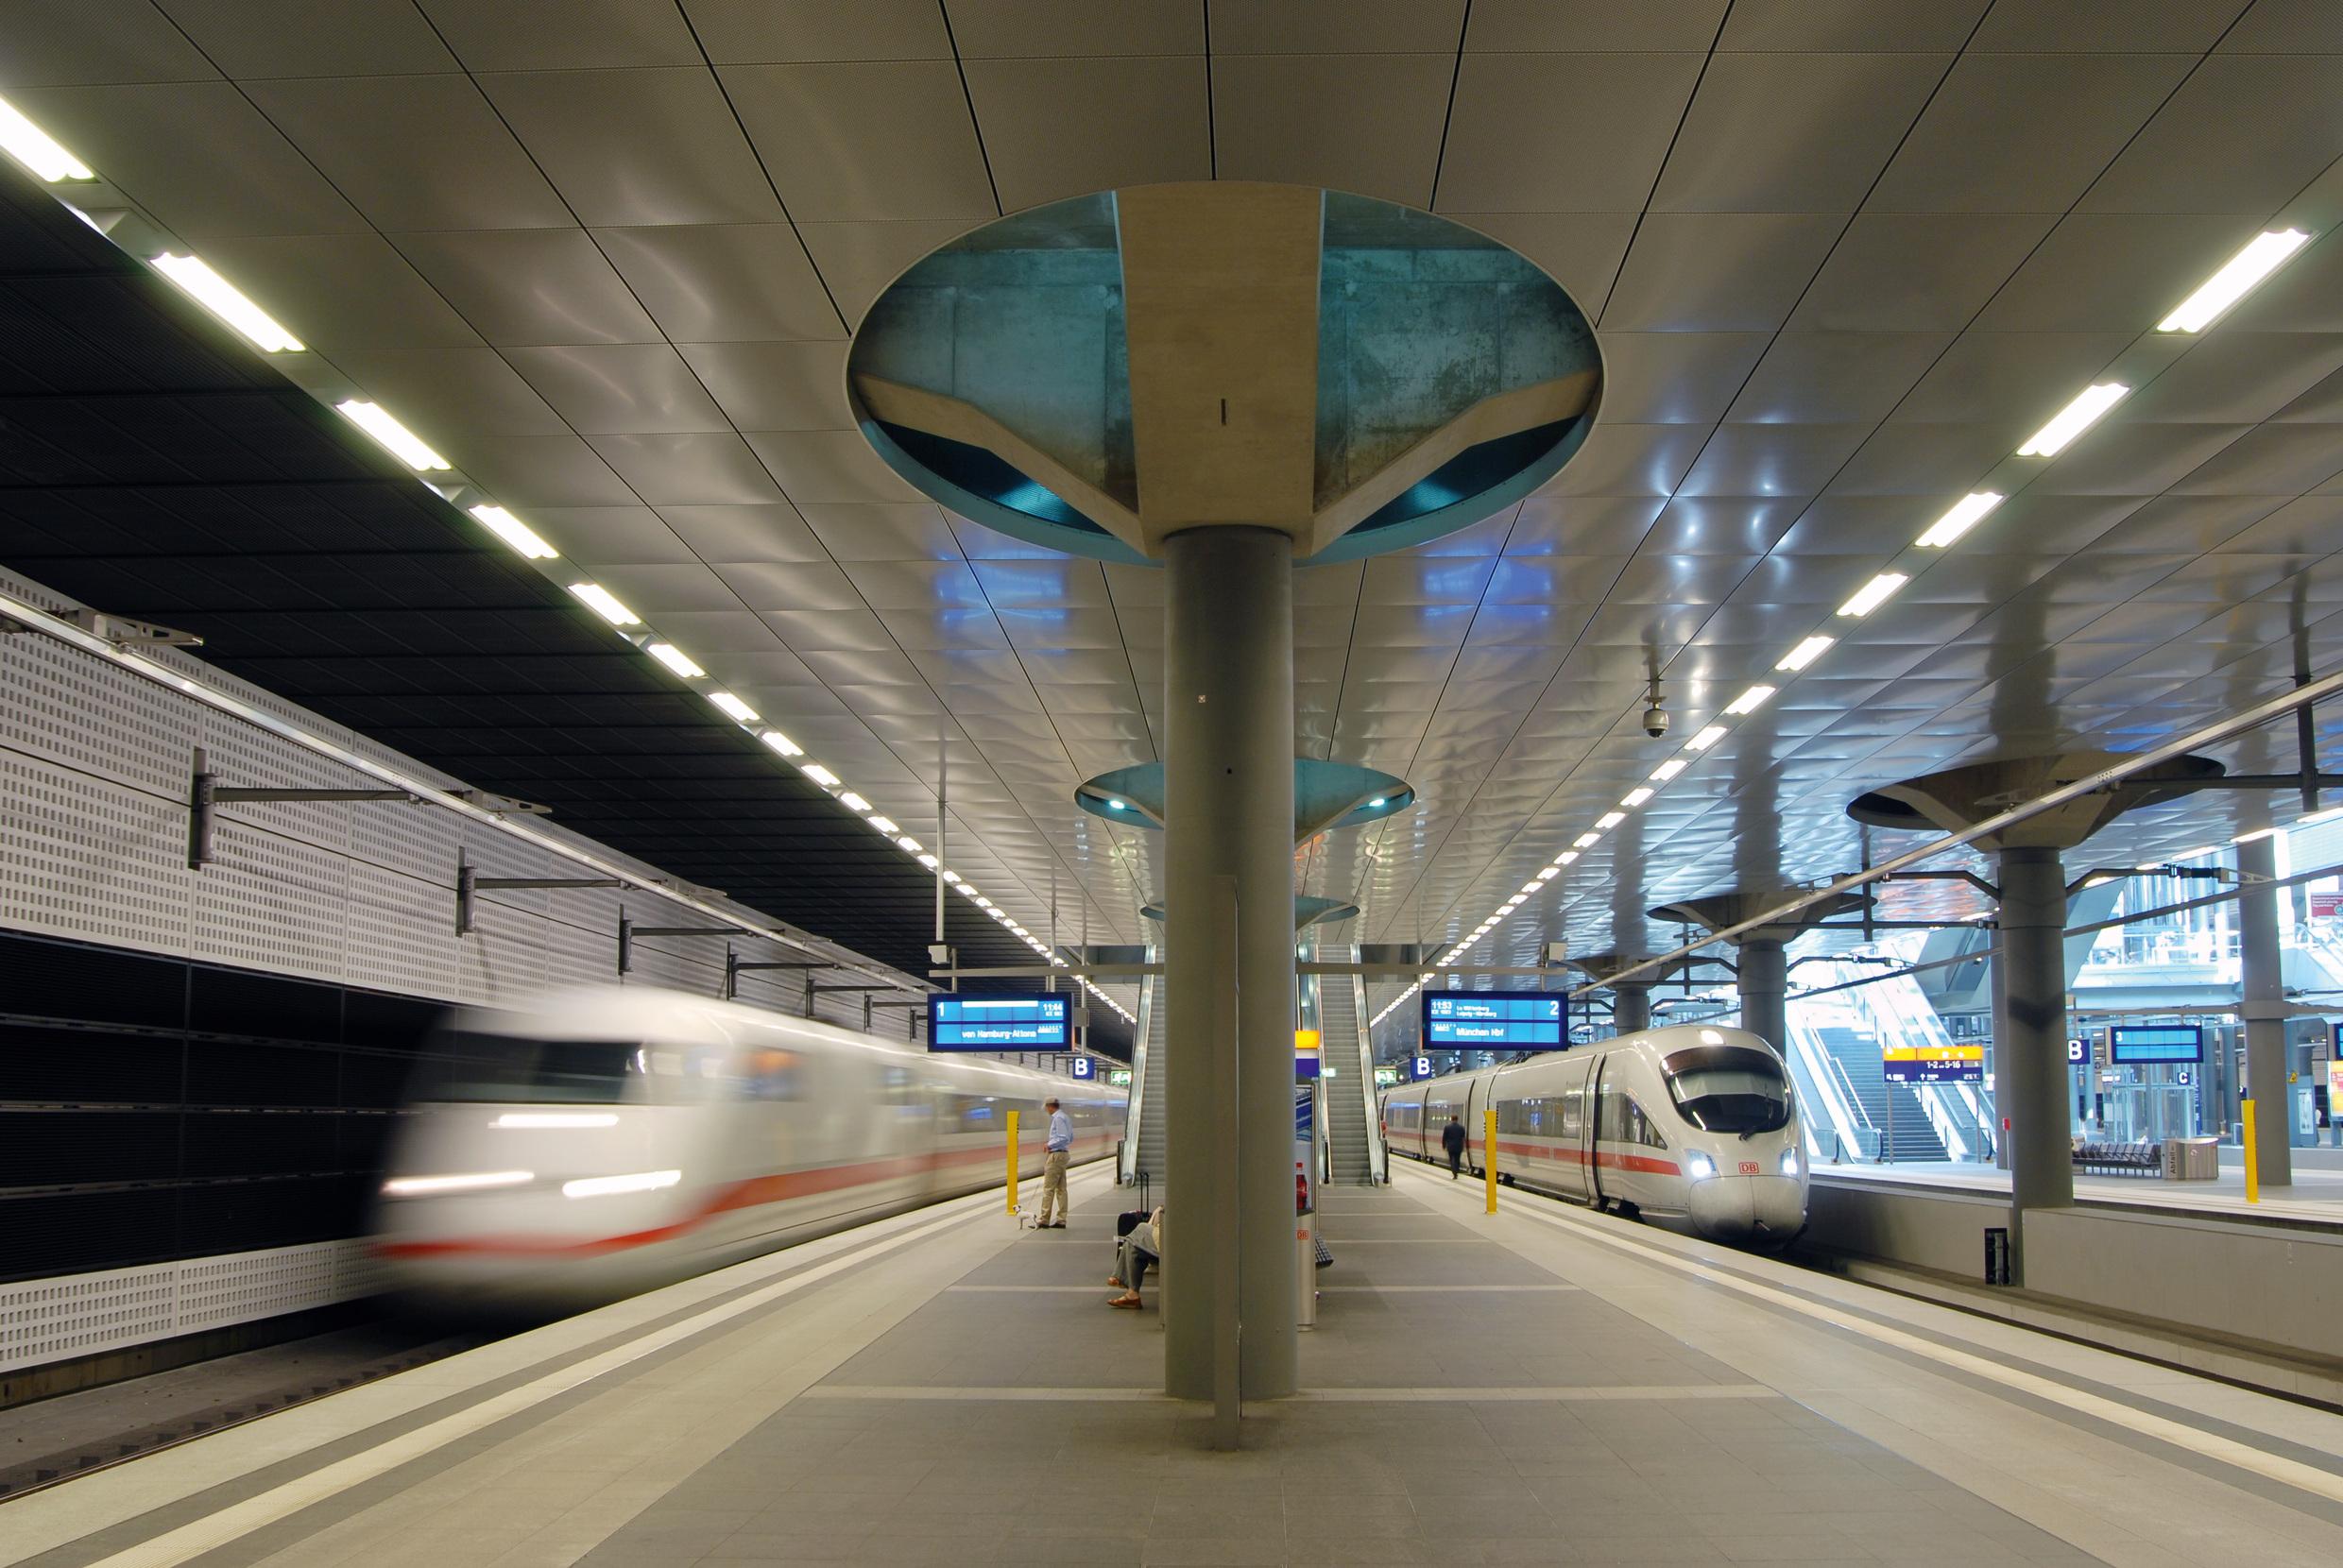 A view of the underground platforms at Berlin Hauptbahnhof with a stationary and a departing ICE train.